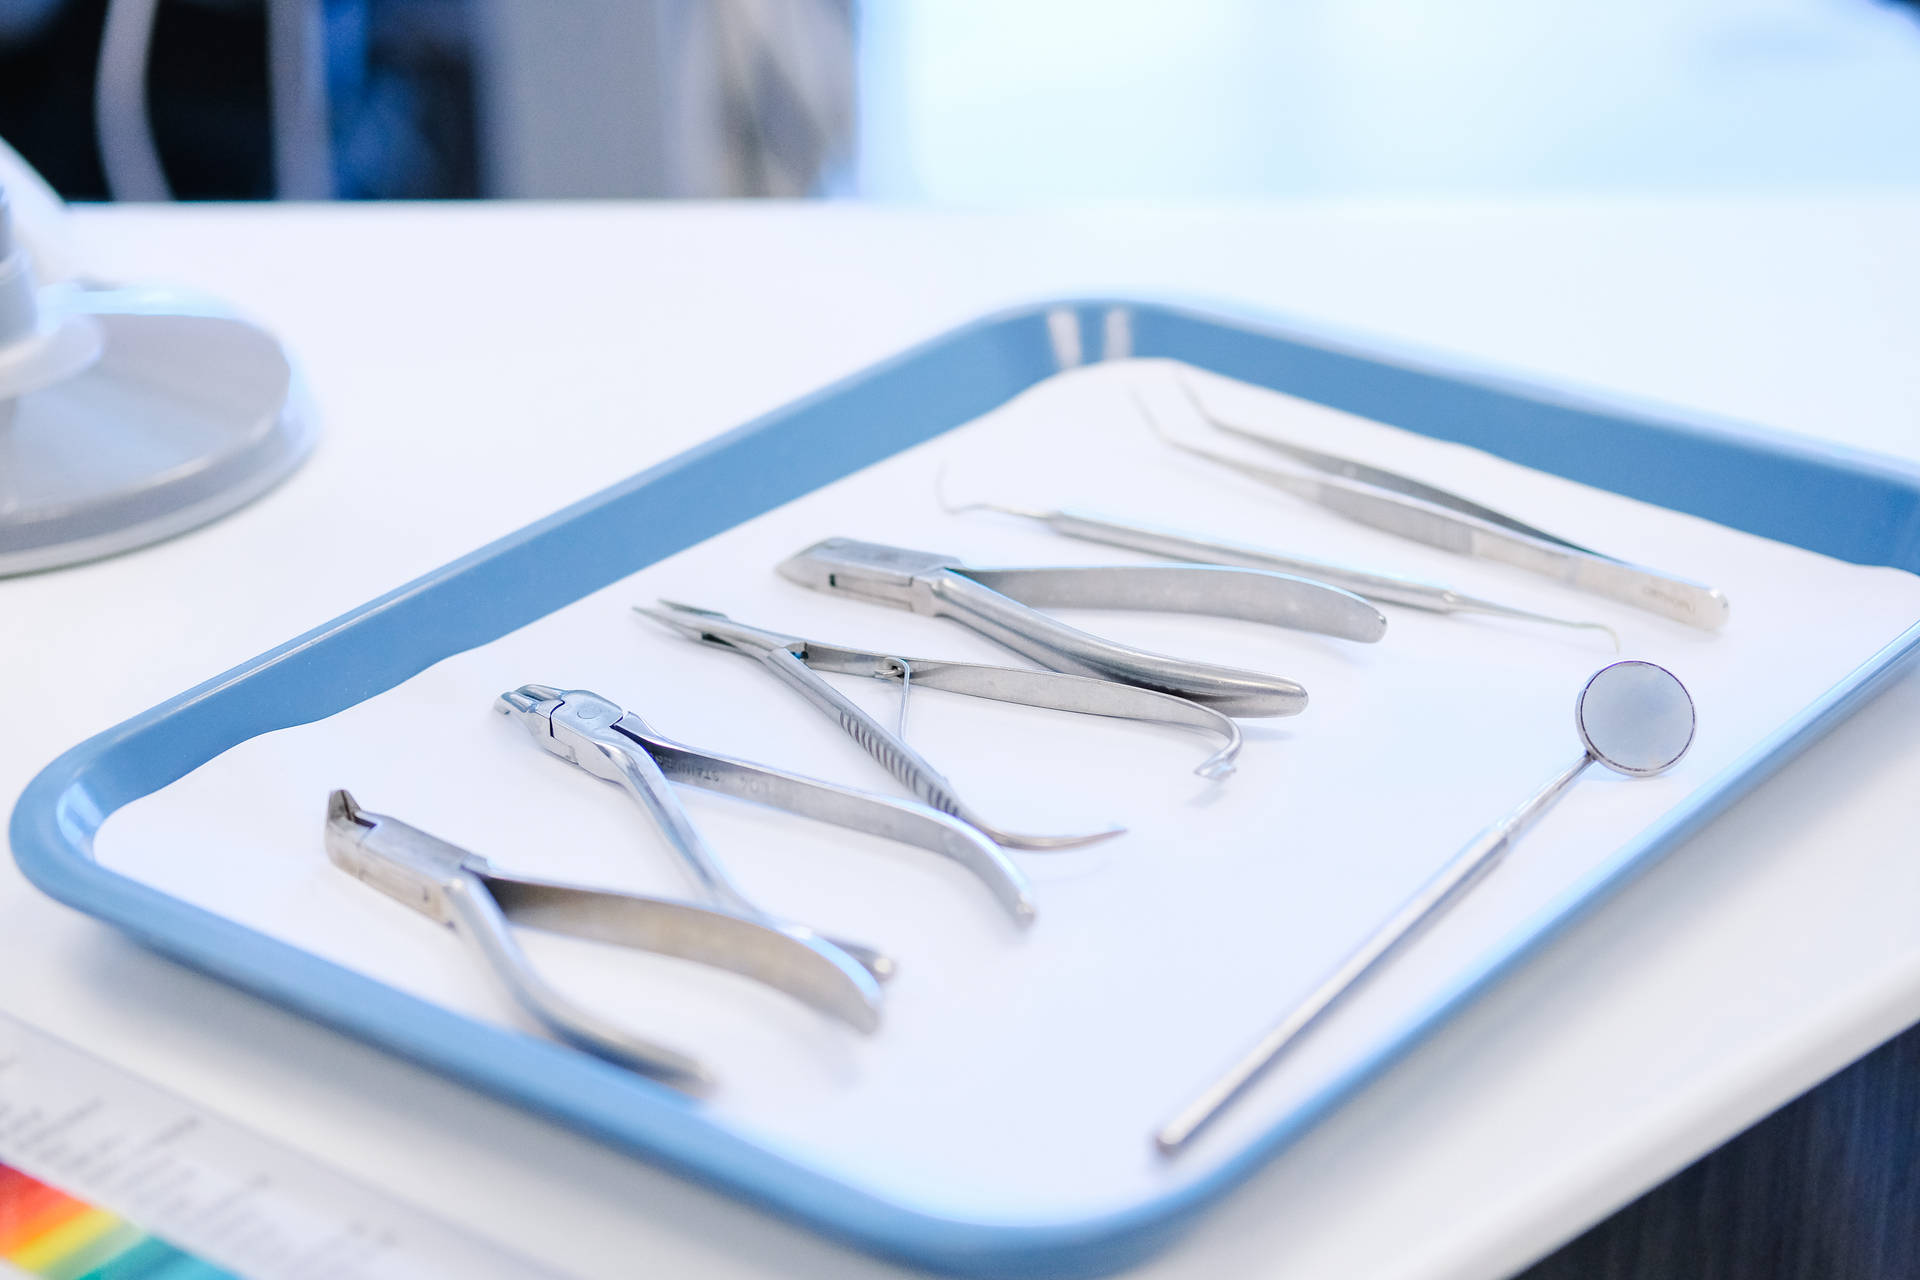 Dentistry Tools On Blue Tray Background